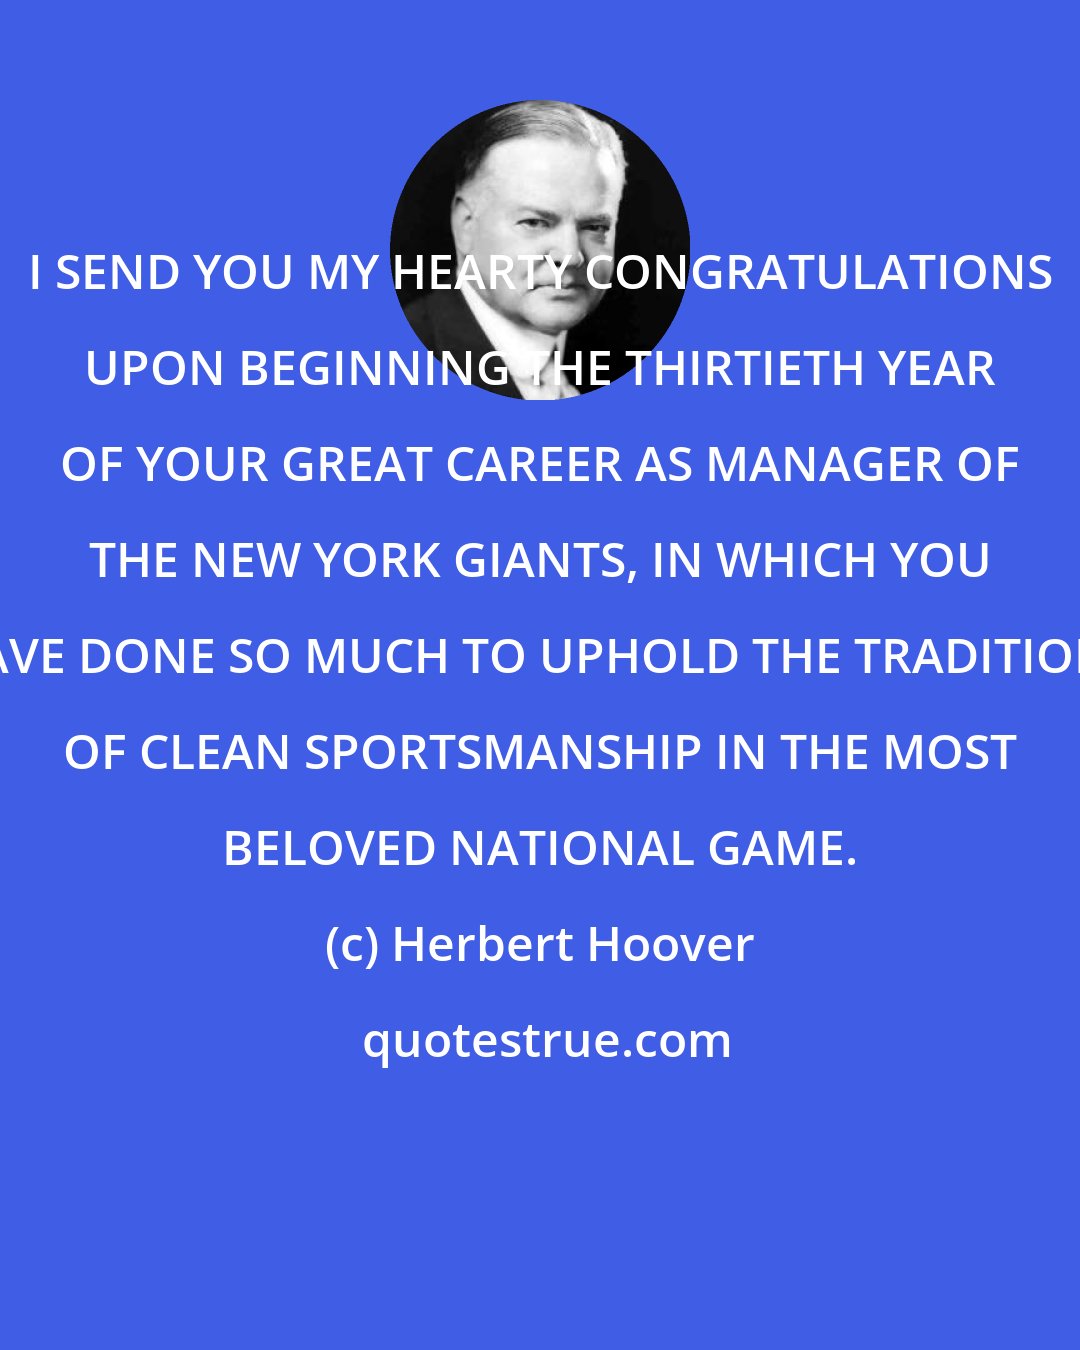 Herbert Hoover: I SEND YOU MY HEARTY CONGRATULATIONS UPON BEGINNING THE THIRTIETH YEAR OF YOUR GREAT CAREER AS MANAGER OF THE NEW YORK GIANTS, IN WHICH YOU HAVE DONE SO MUCH TO UPHOLD THE TRADITIONS OF CLEAN SPORTSMANSHIP IN THE MOST BELOVED NATIONAL GAME.